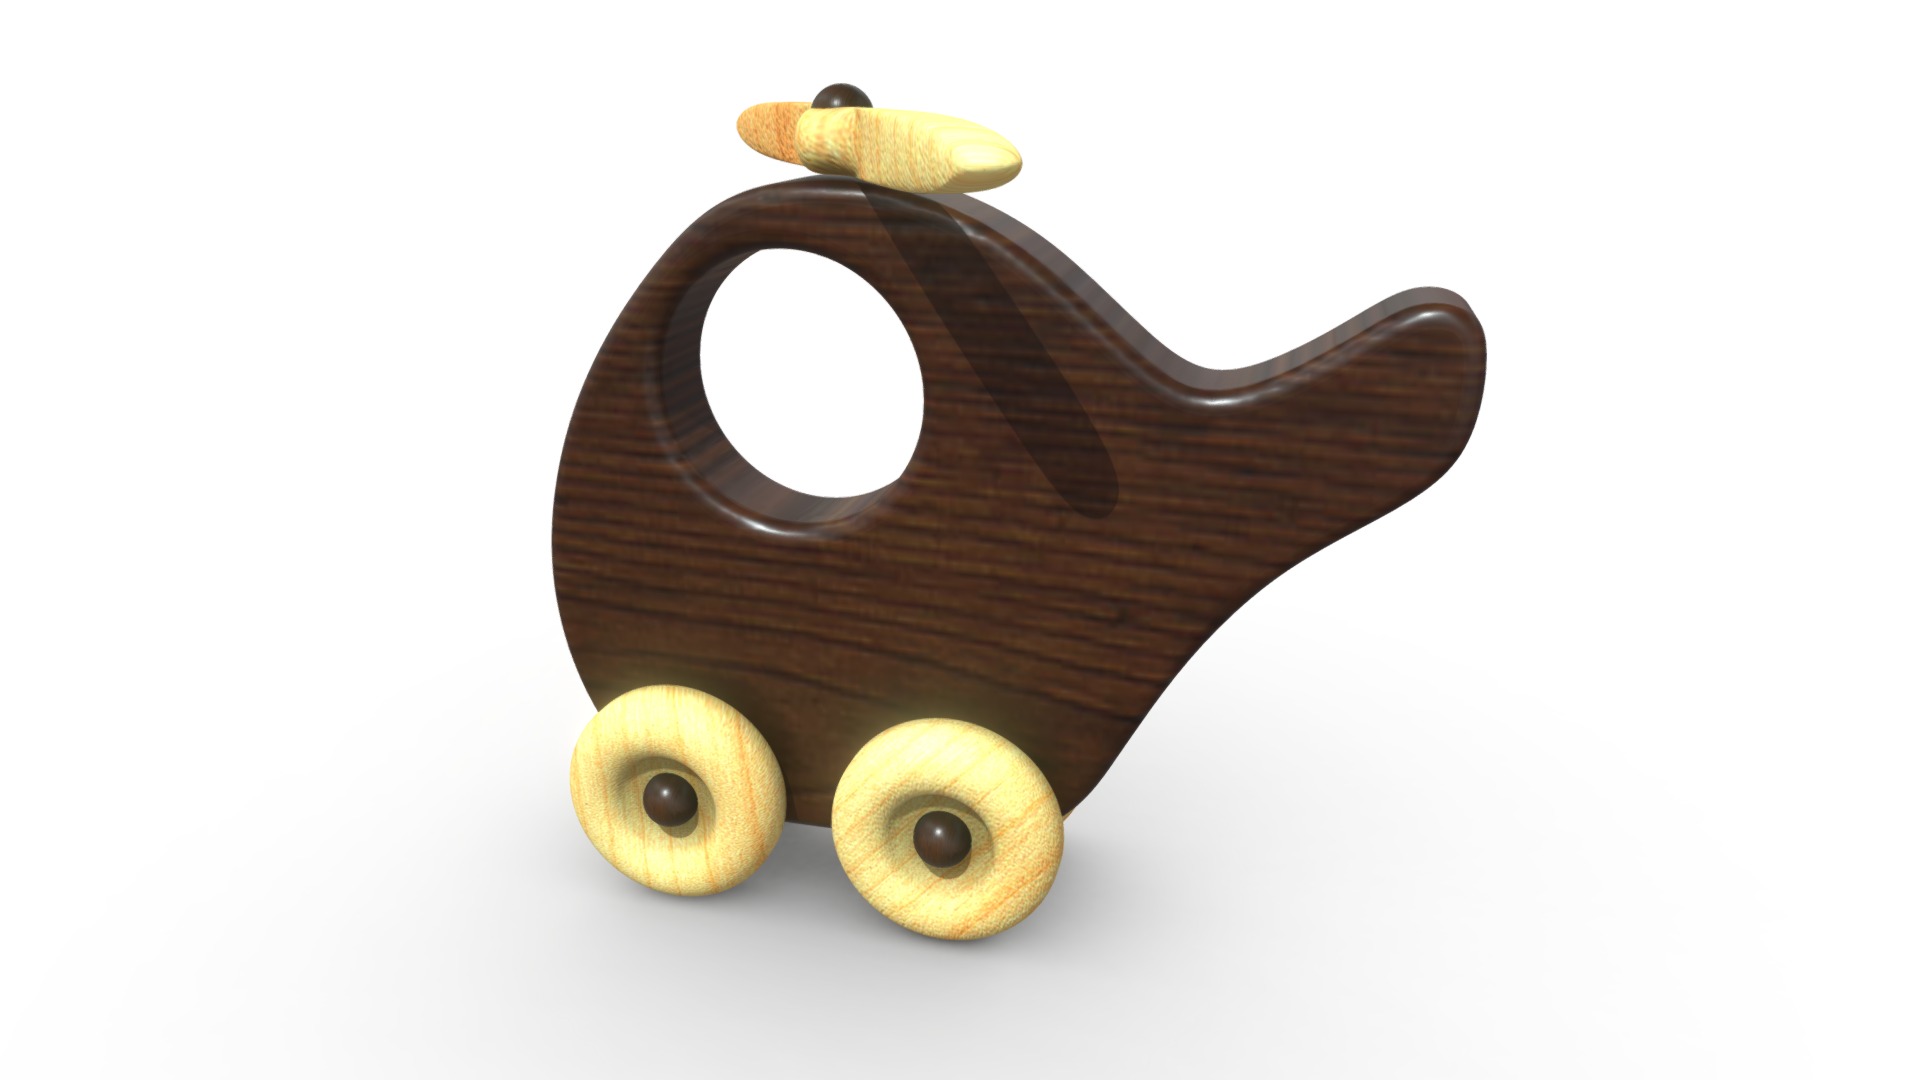 3D model Sesamo Hely Juguete de madera - This is a 3D model of the Sesamo Hely Juguete de madera. The 3D model is about a wooden toy with wheels.